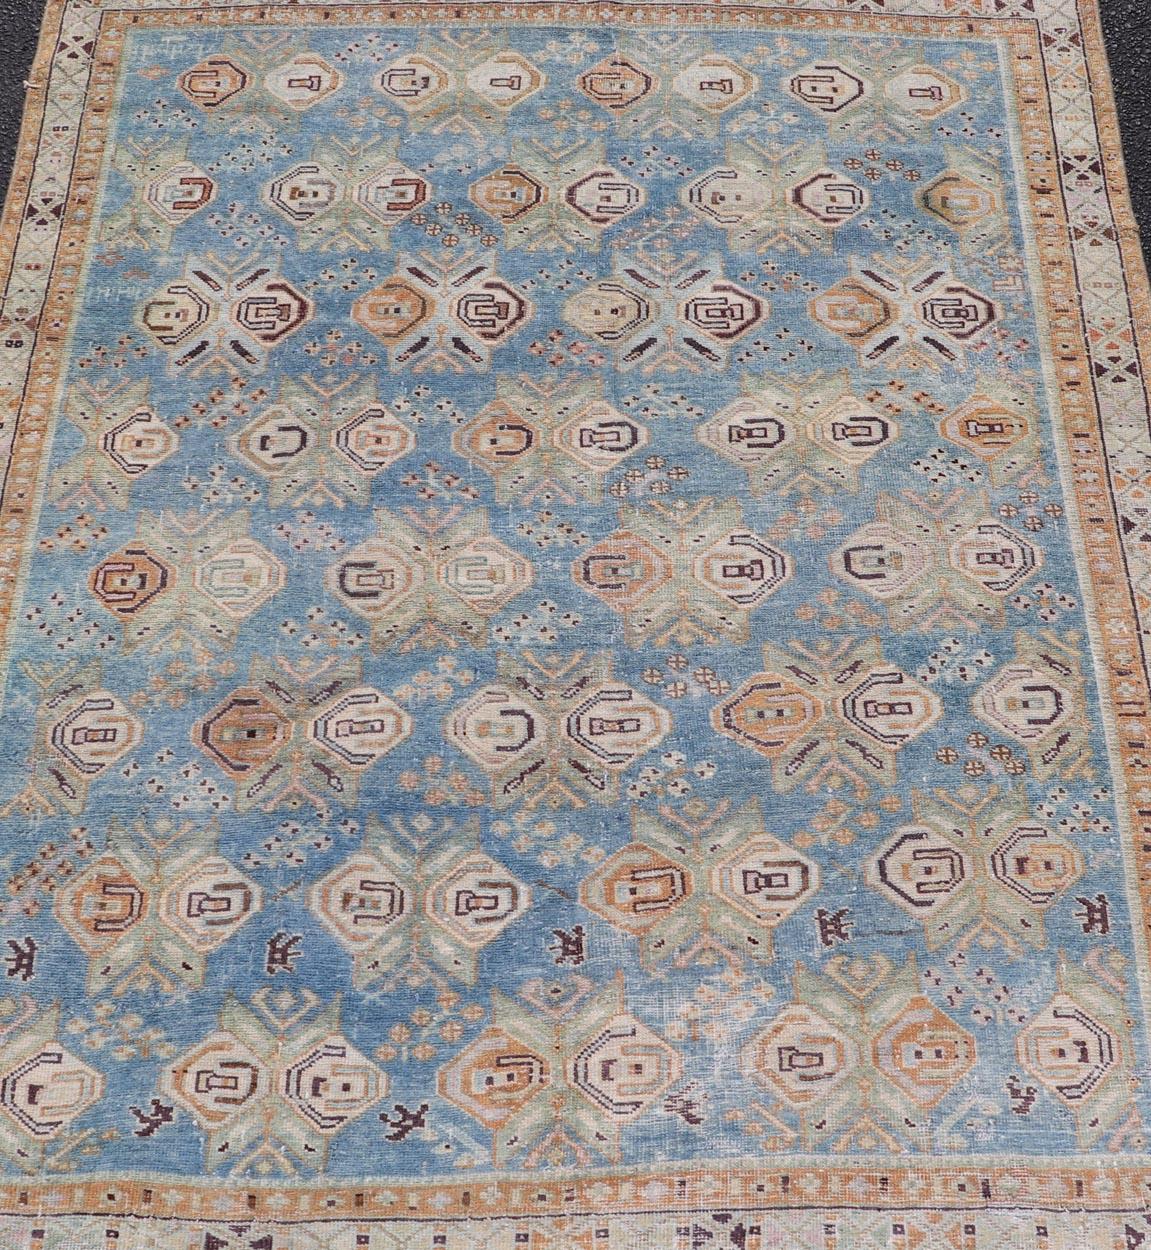 Persian Antique Afshar Rug in Light Blue Background With Tribal Floral Motifs. Keivan Woven Arts / rug EMB-22196-15093, origin/Iran early-20th century. Afshar
Measures: 4'1 x 5'0 
Handwoven by Afshar tribal artisan in southeastern Iran, the piece’s